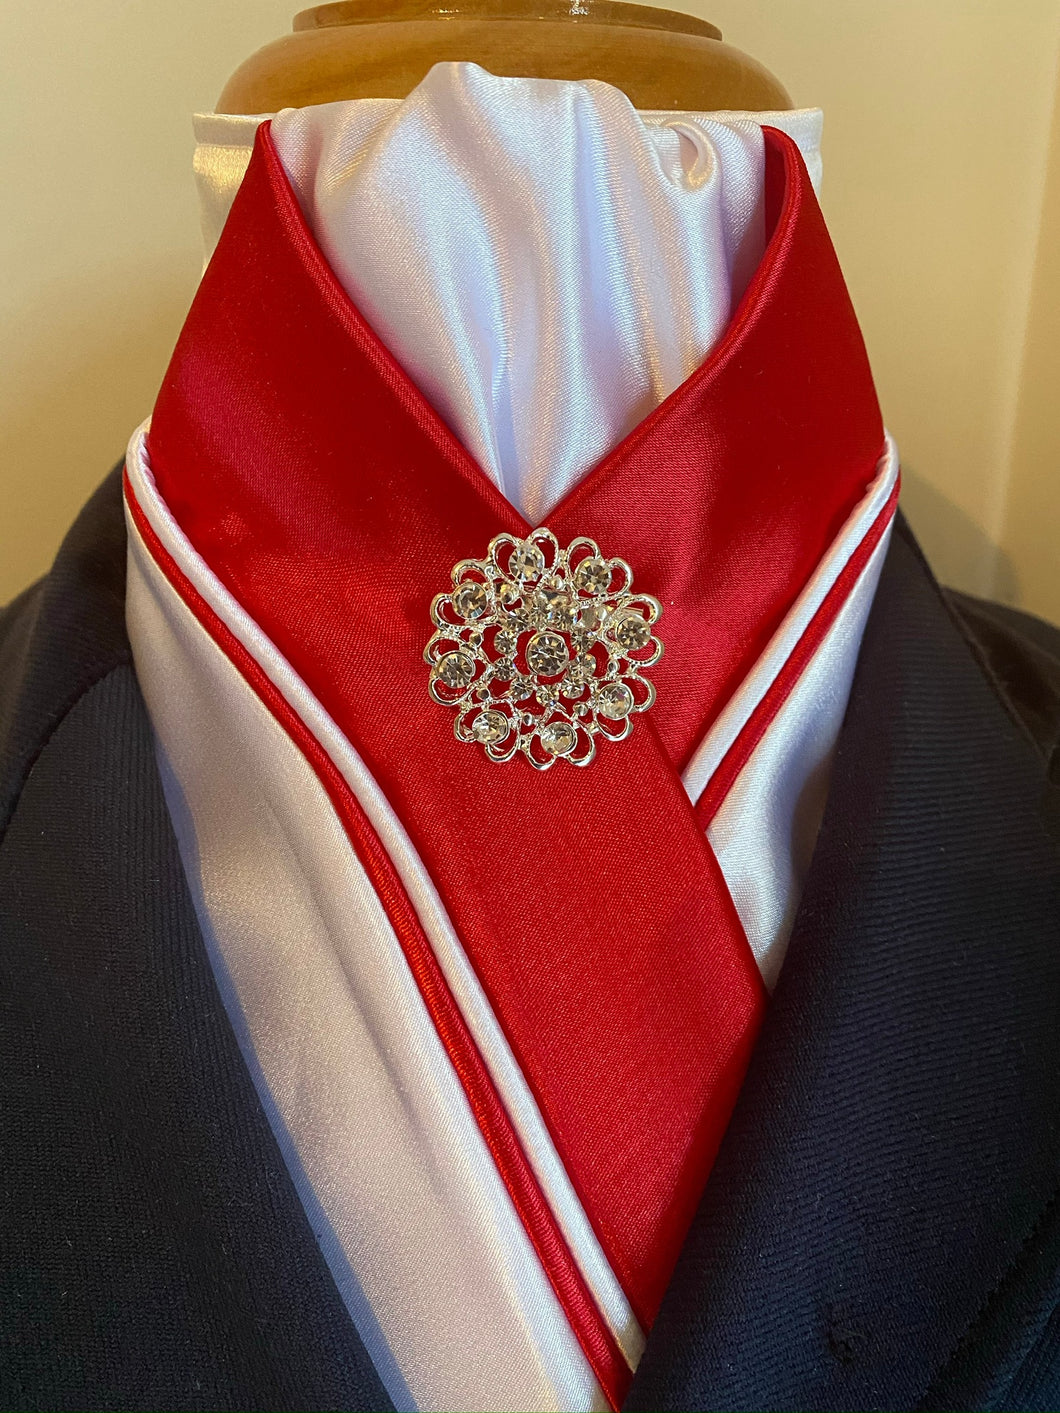 HHD Dressage Stock Tie Grace’ in Red